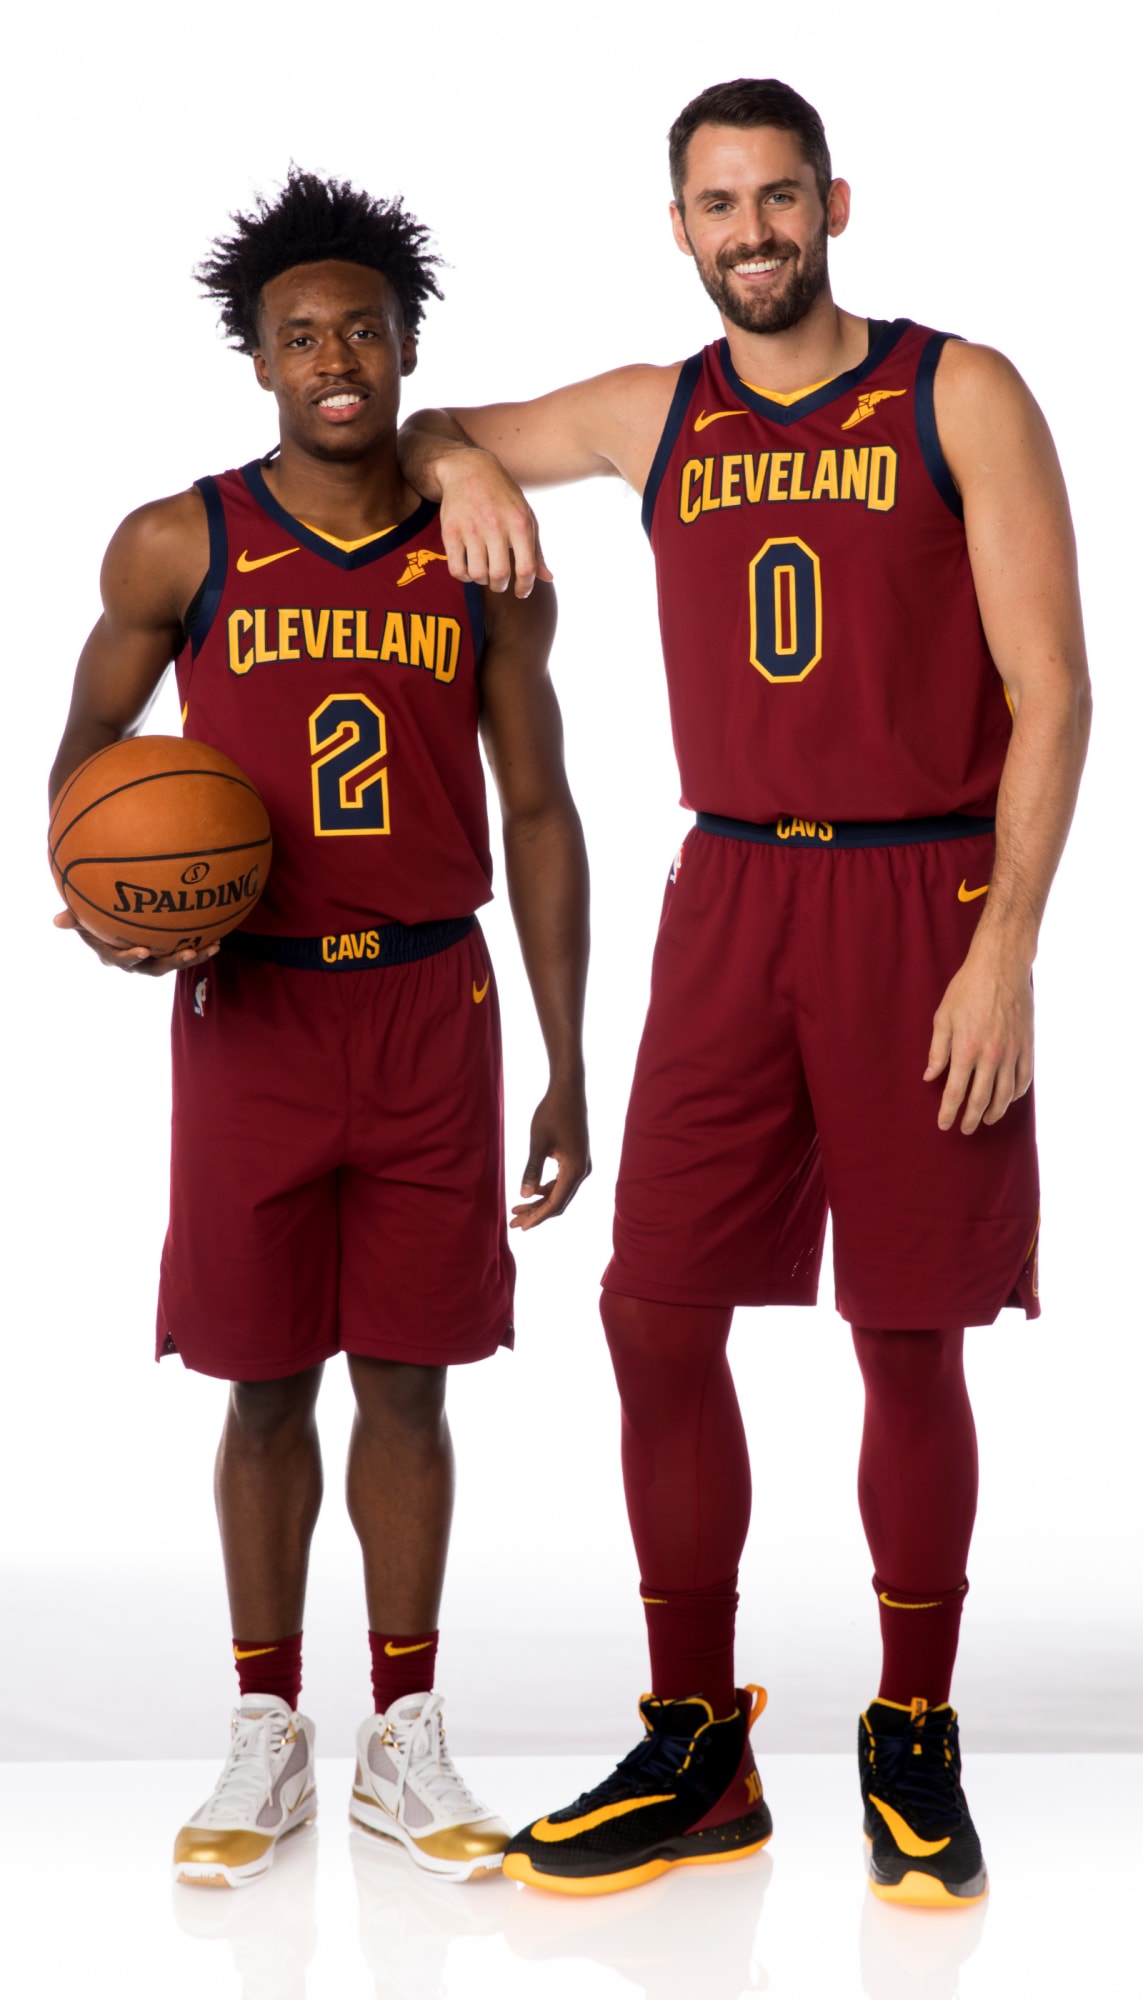 EXCLUSIVE: The Untold Story Behind the Cavs' 1990s Uniforms